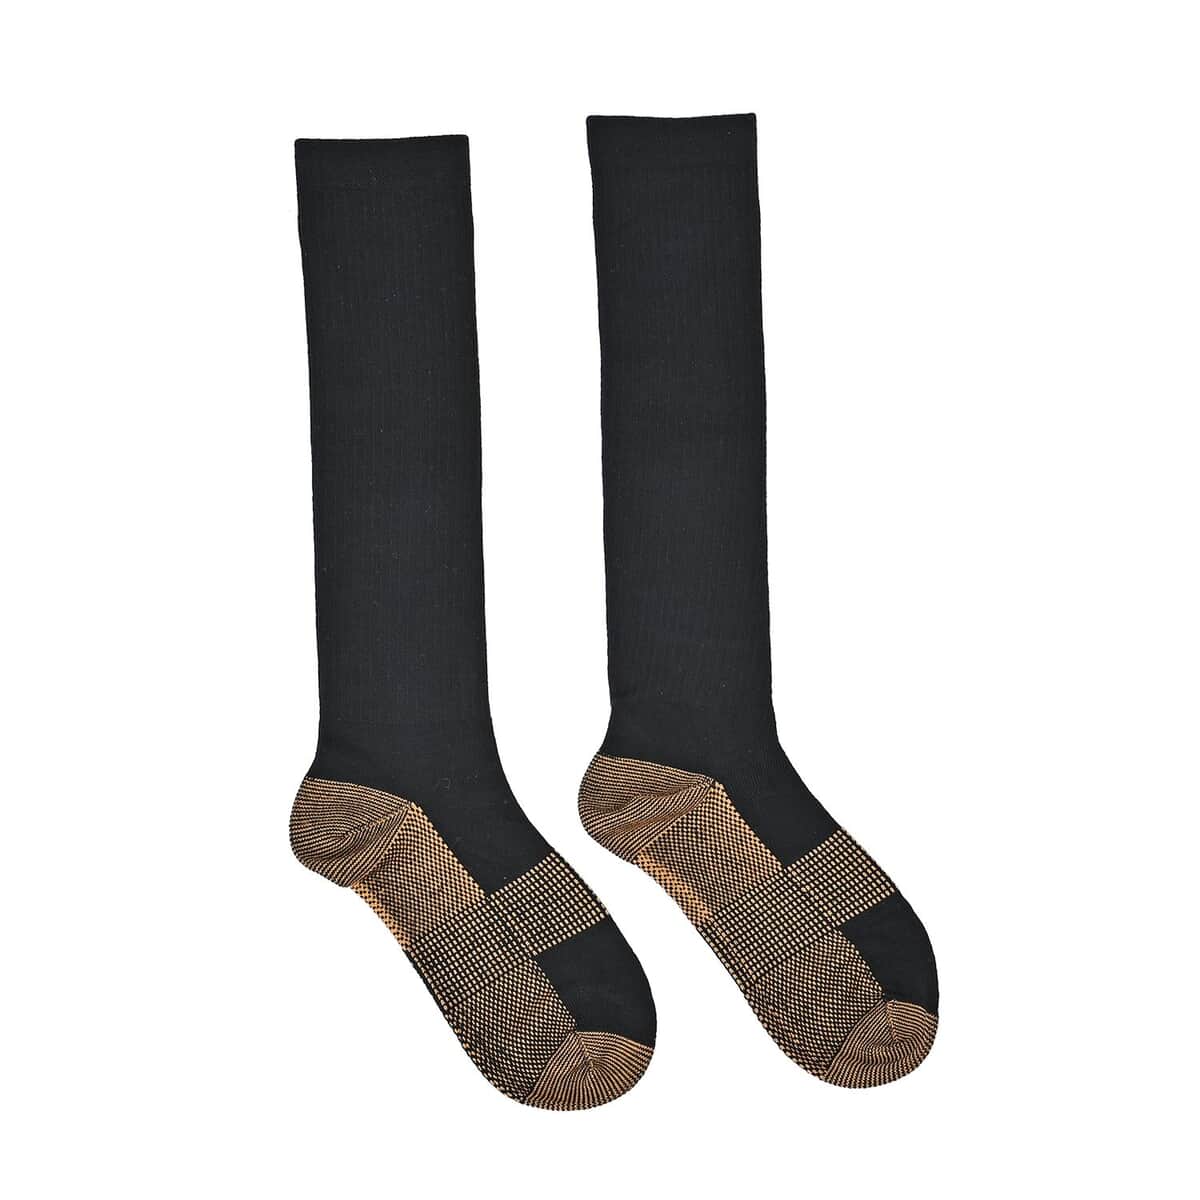 Set of 4 Pairs Copper Infused Compression Knee Length Socks - Classic Multi Color (S/M)  image number 4